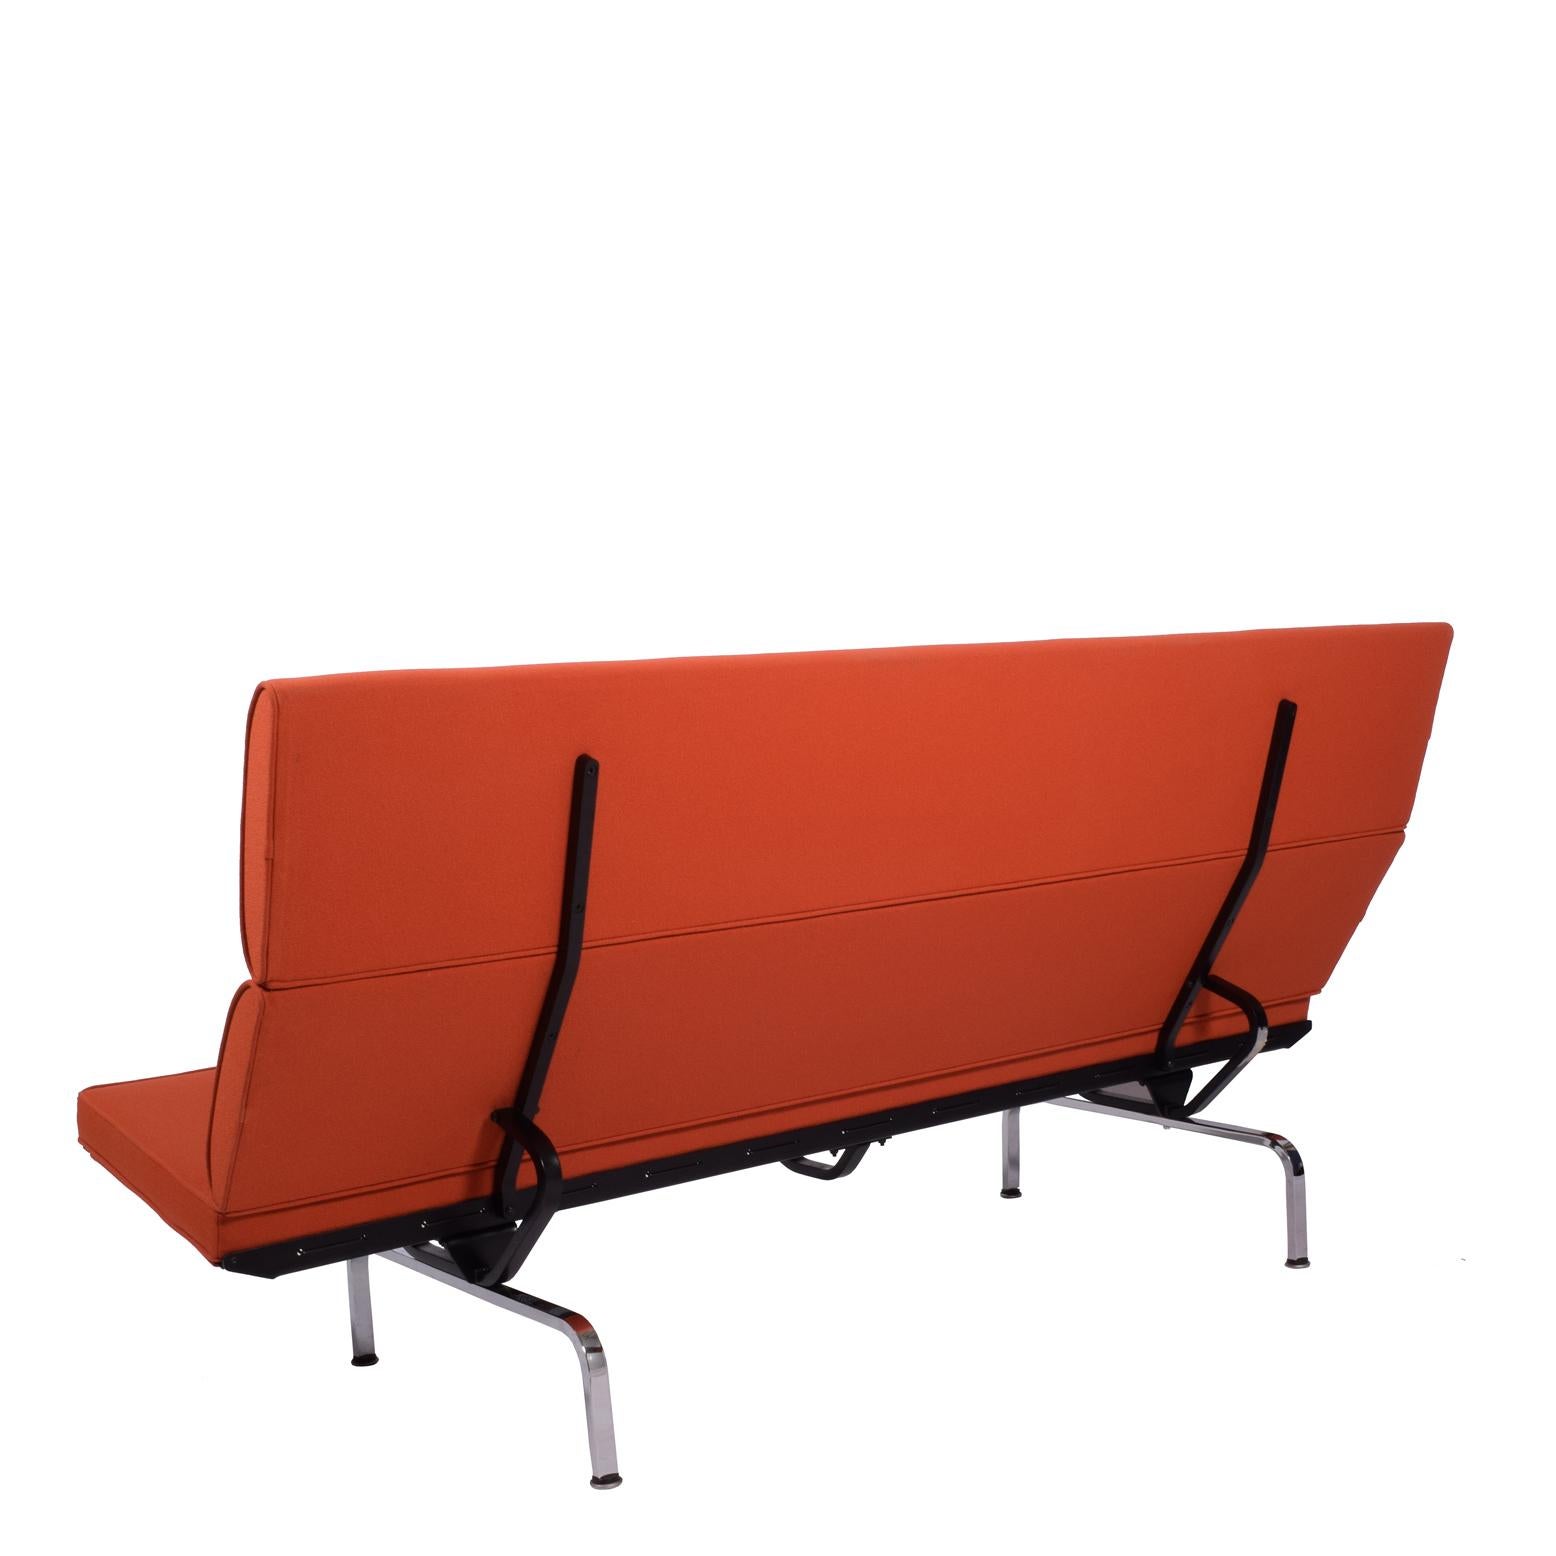 American Compact Sofa by Charles Eames for Herman Miller